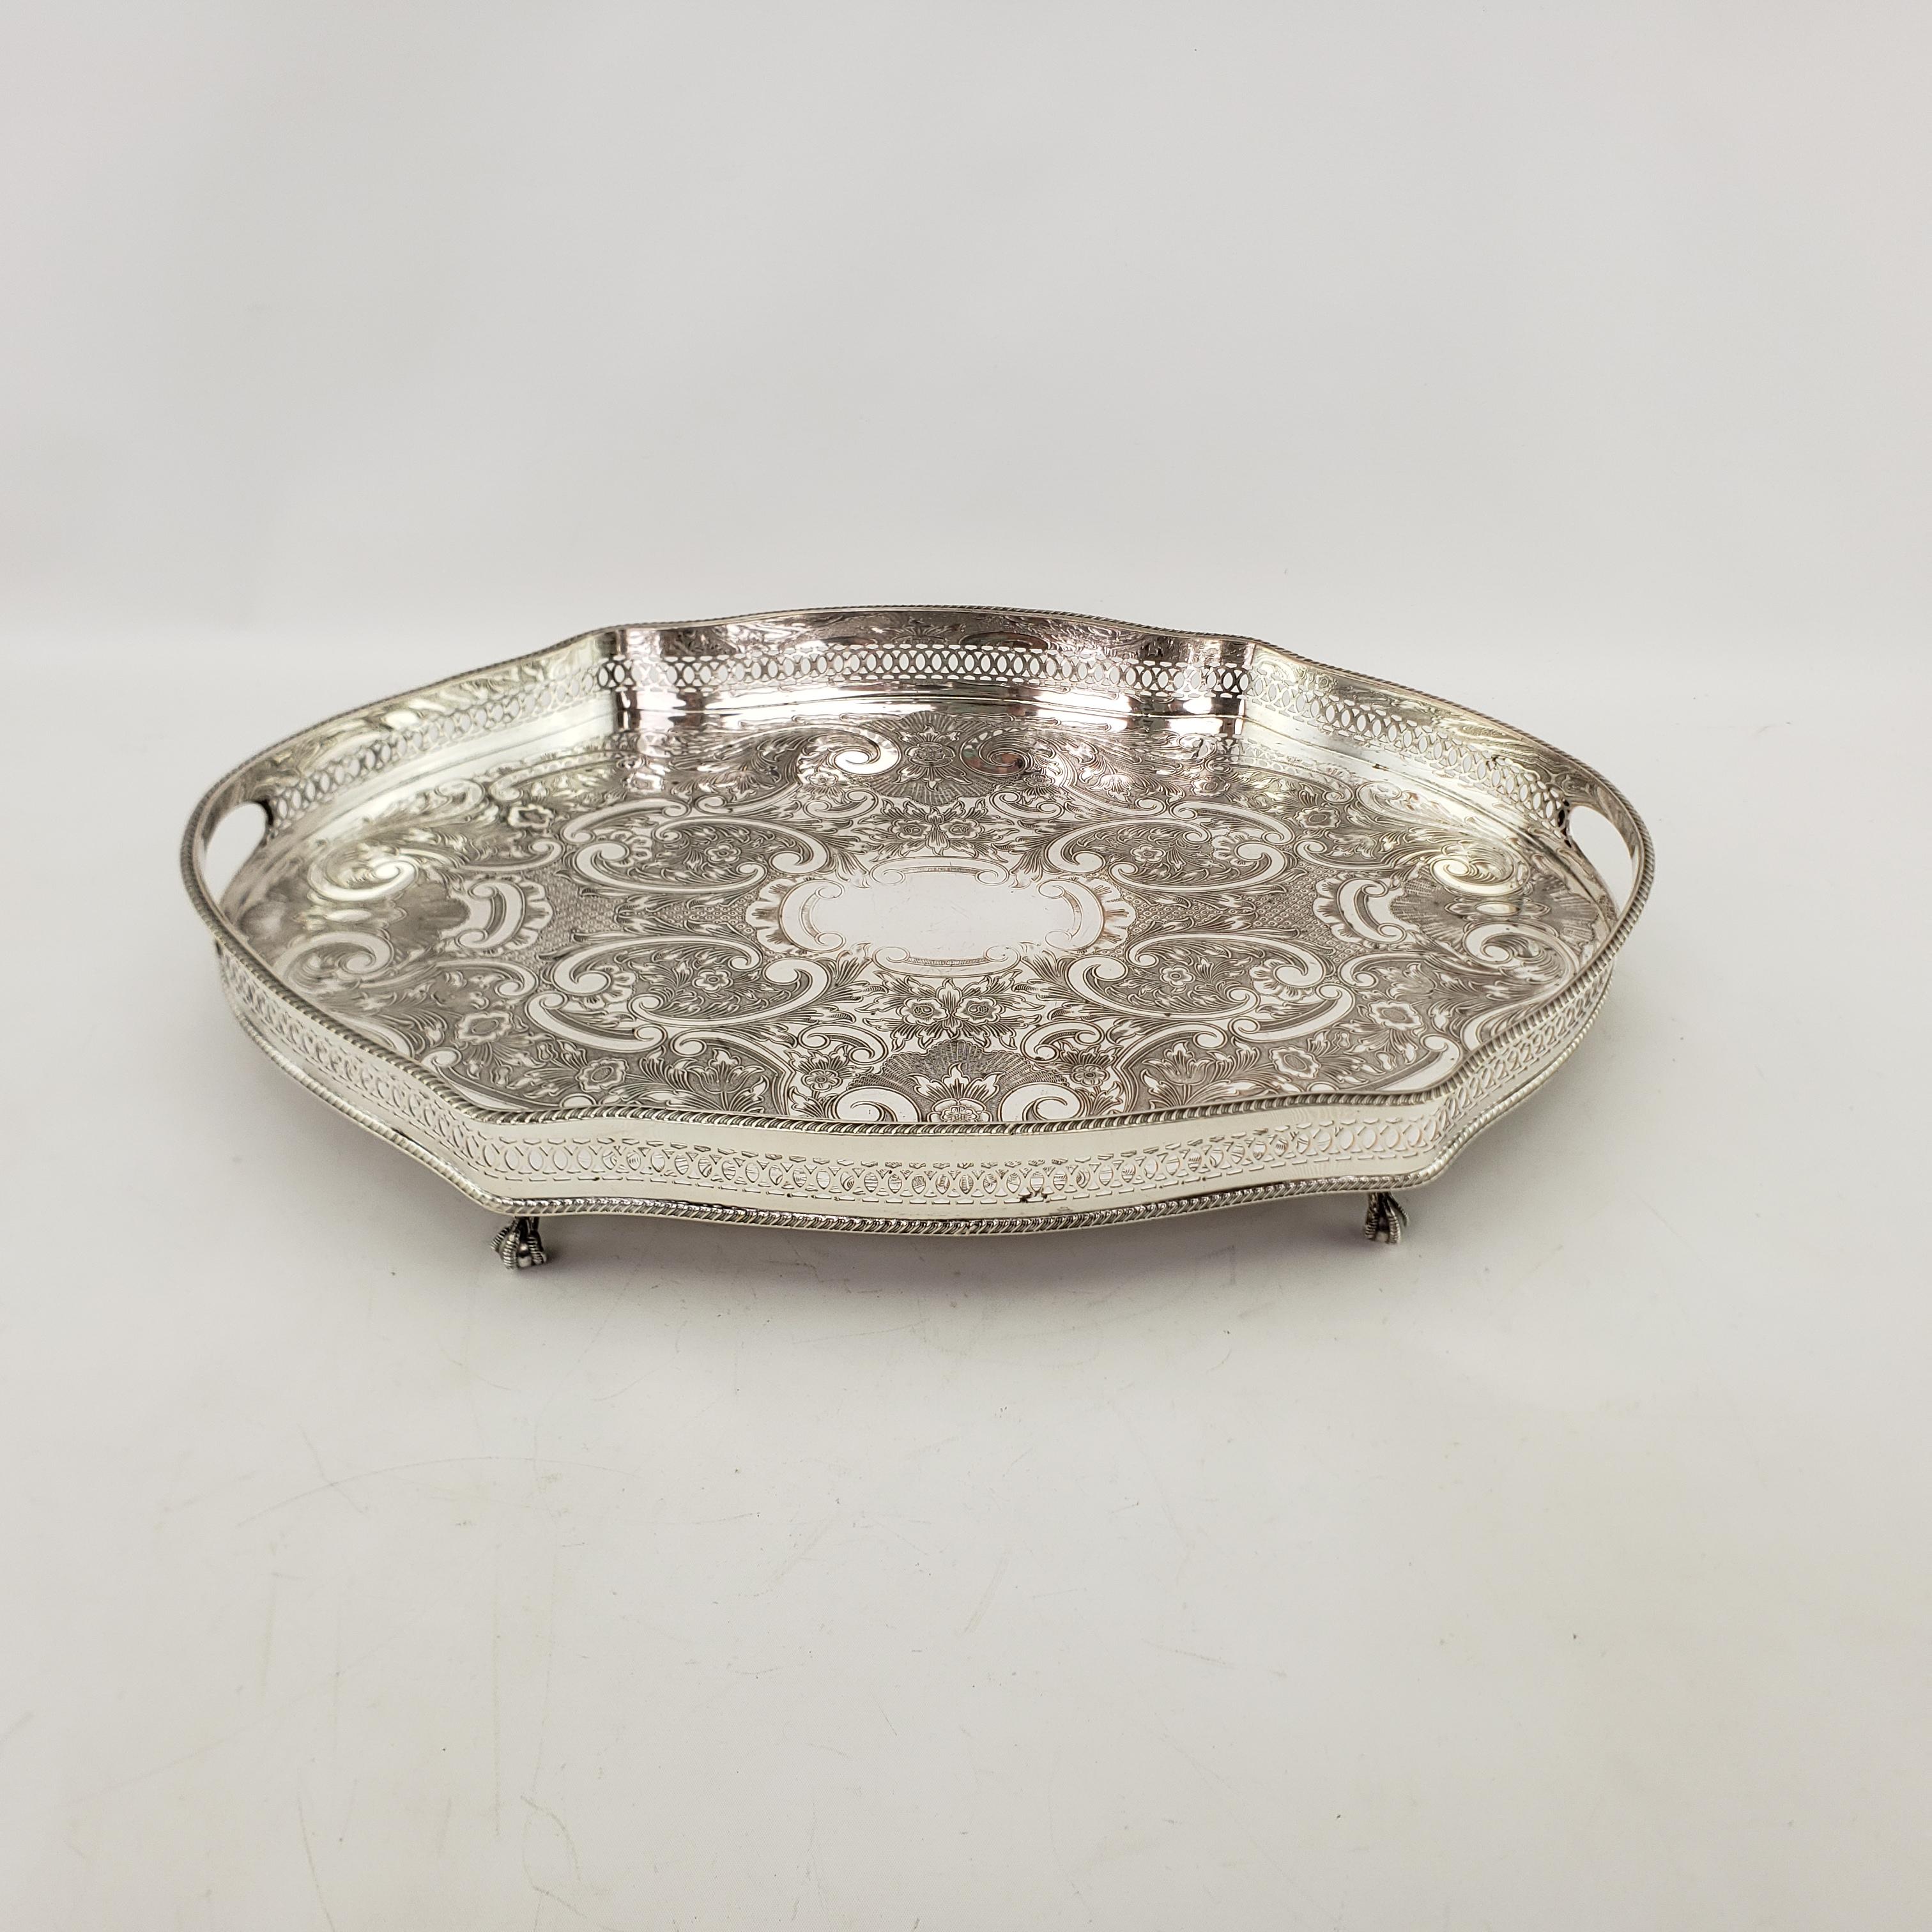 Victorian Antique Silver Plated Footed Gallery Serving Tray with Ornate Floral Engraving